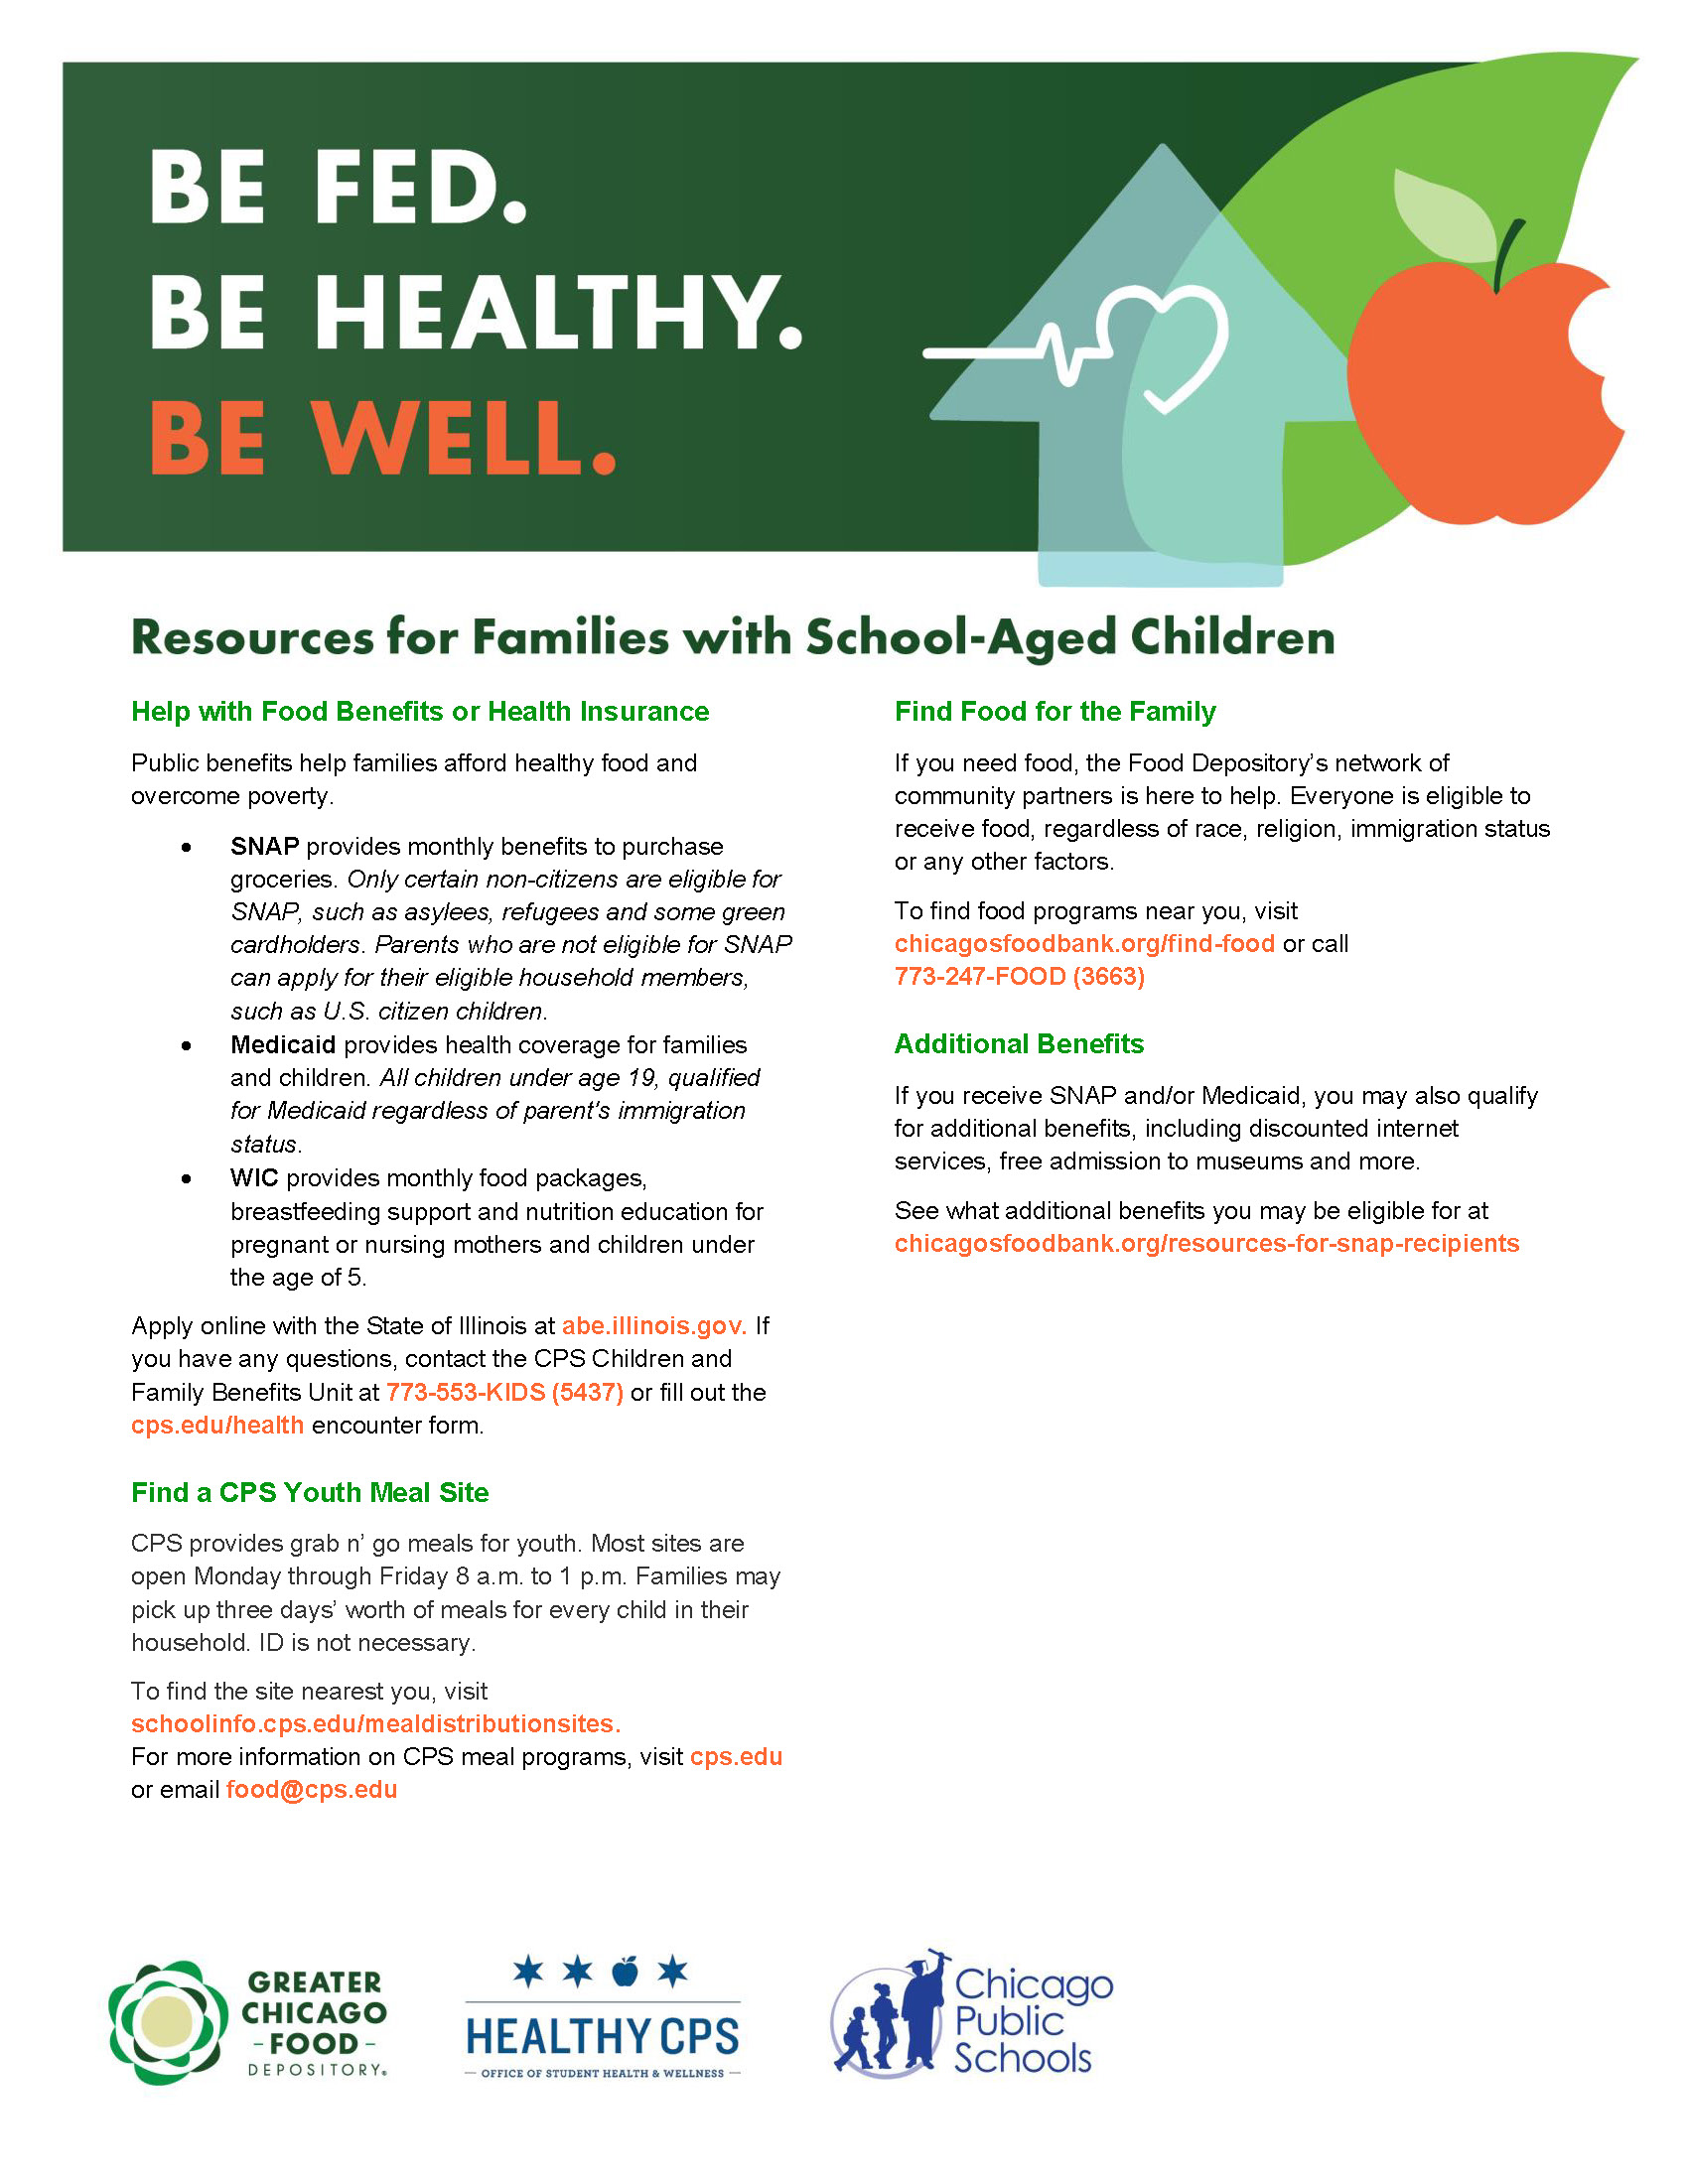 Resources for families with school-aged children